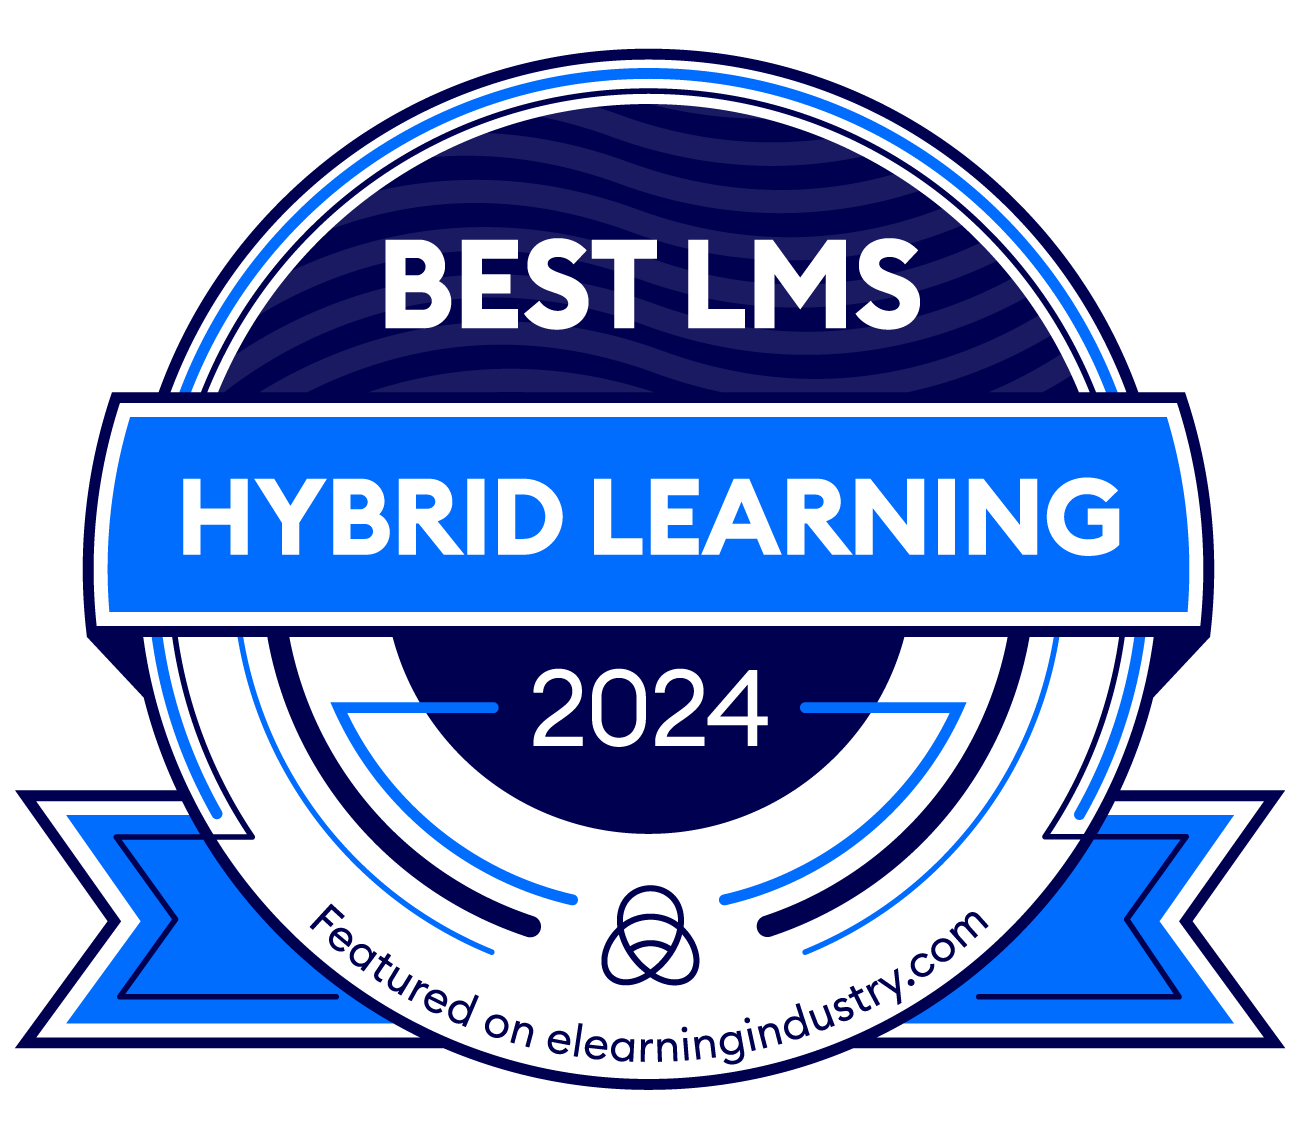 eLearning Industry - Best LMS for Hybrid Learning